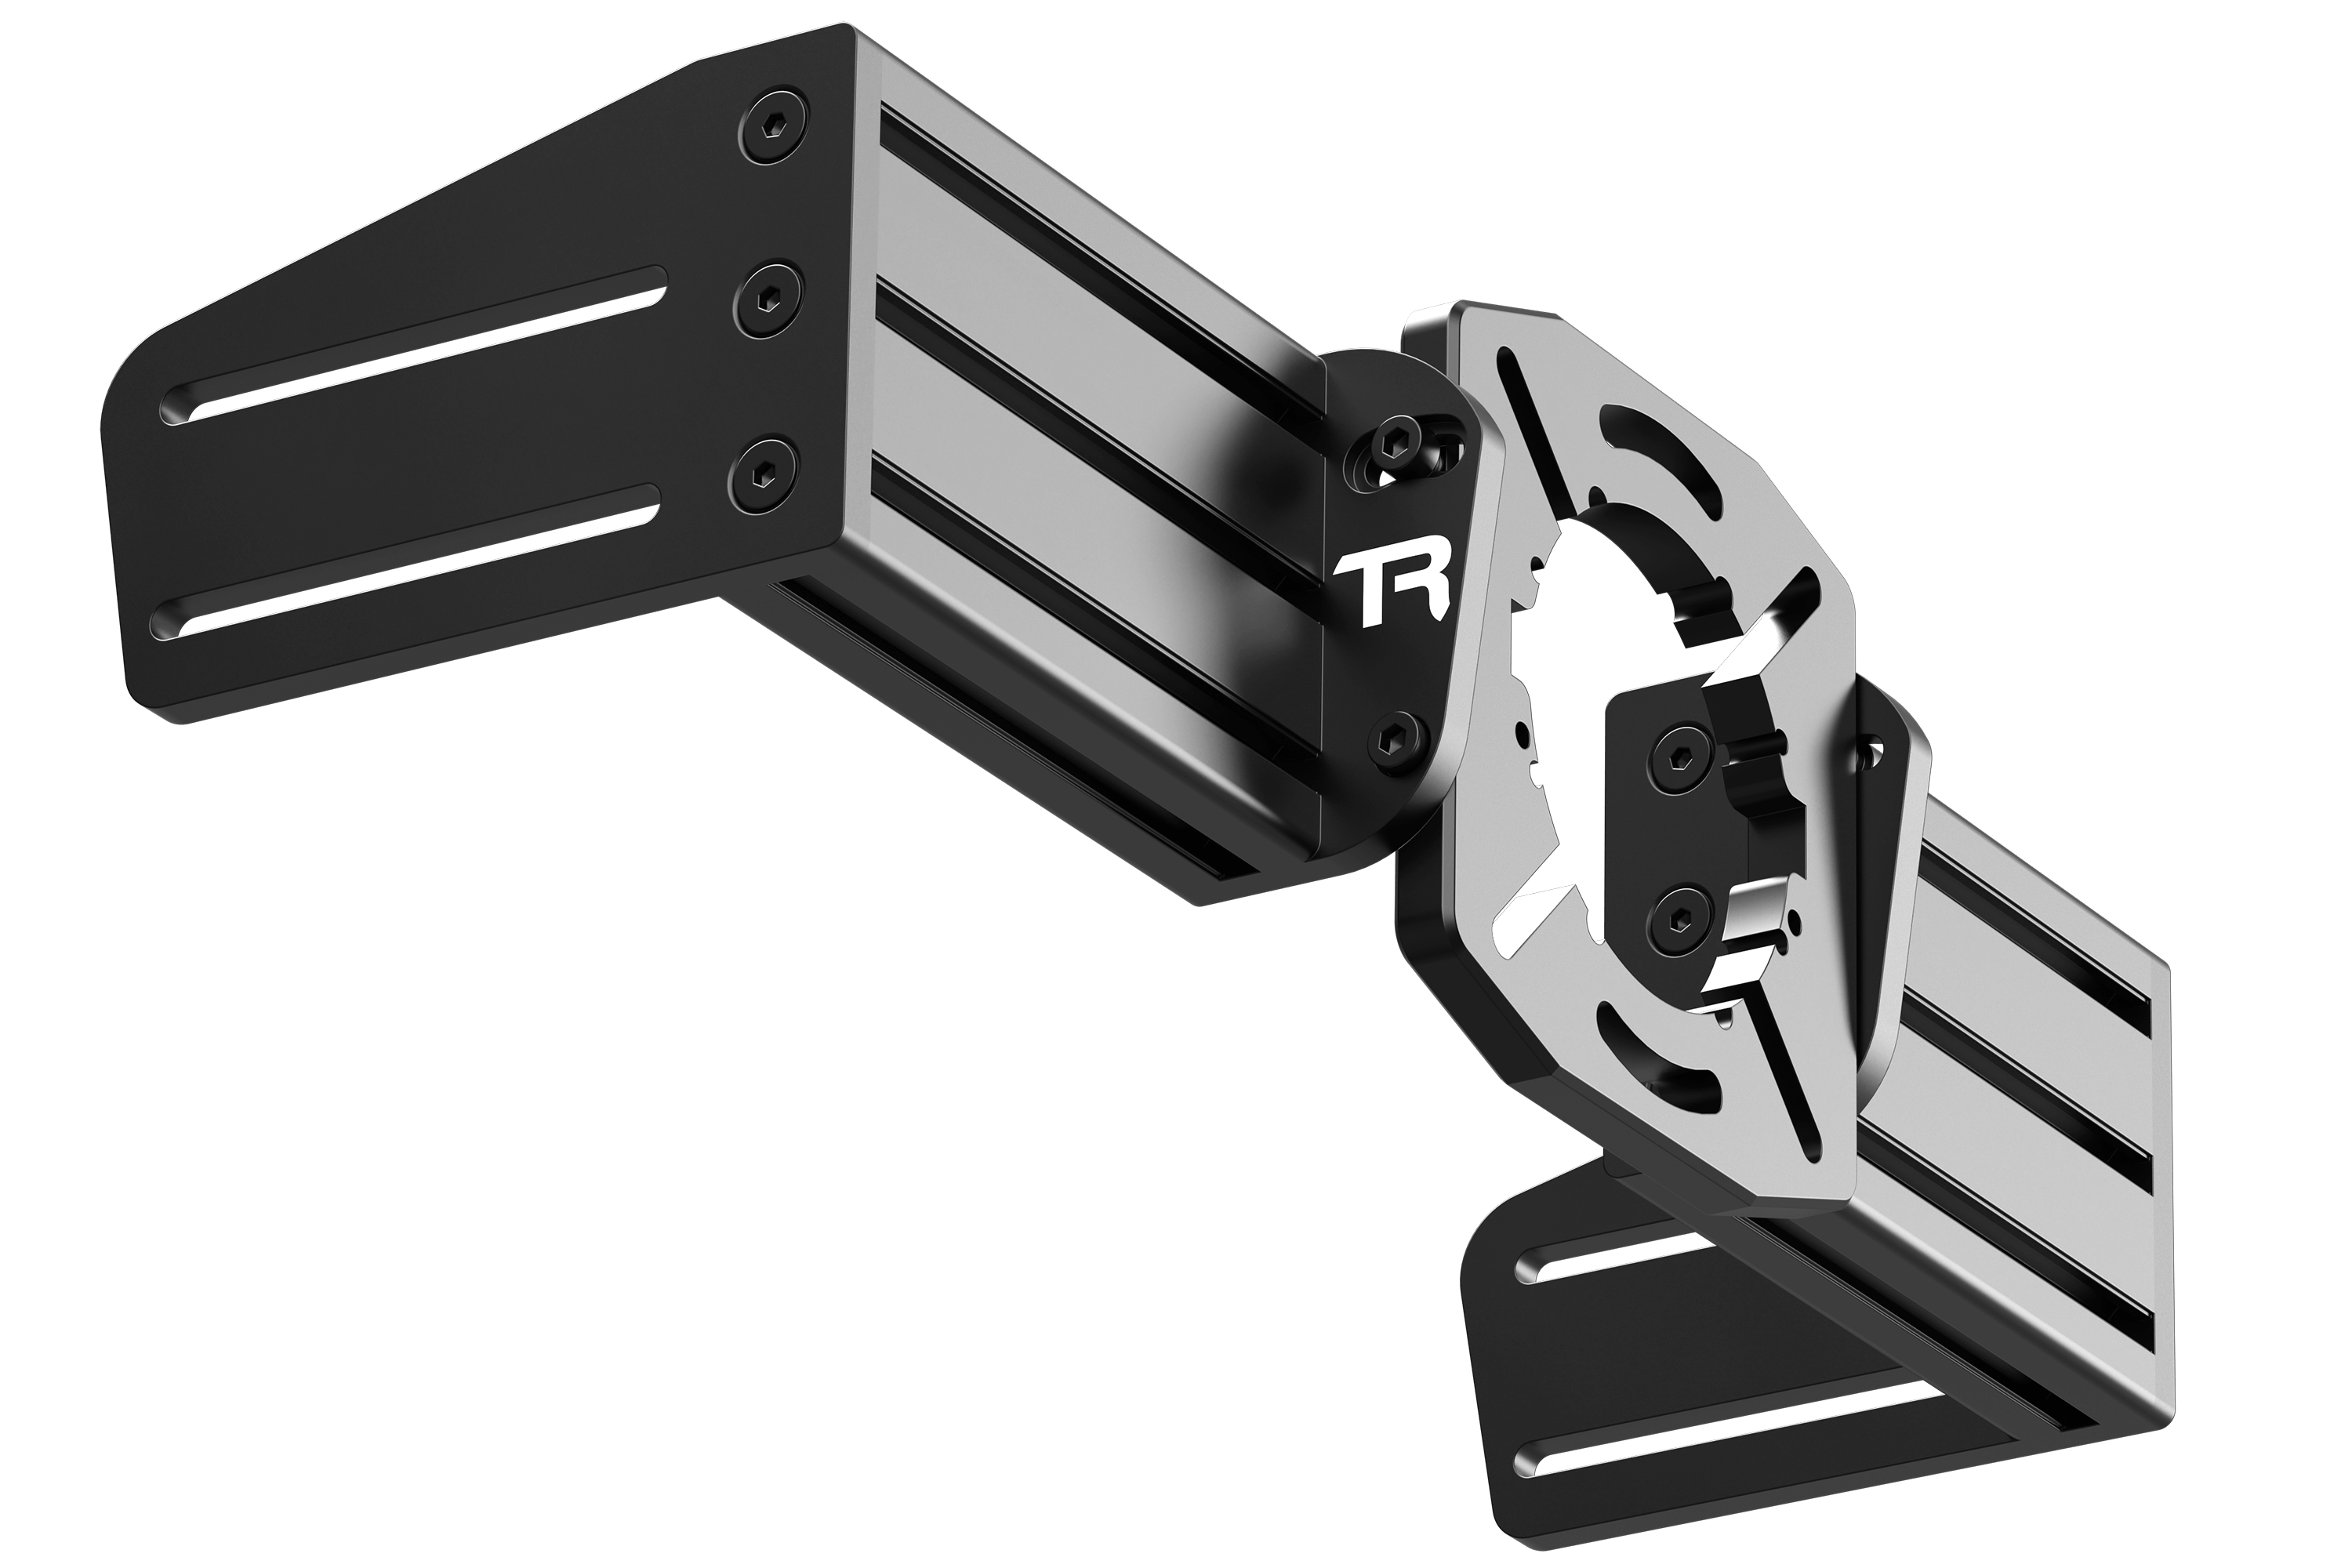 TR-One Black Fully Adjustable Direct Fit Wheel Mount for Simucube, VRS, Accuforce, OSW, Mige etc